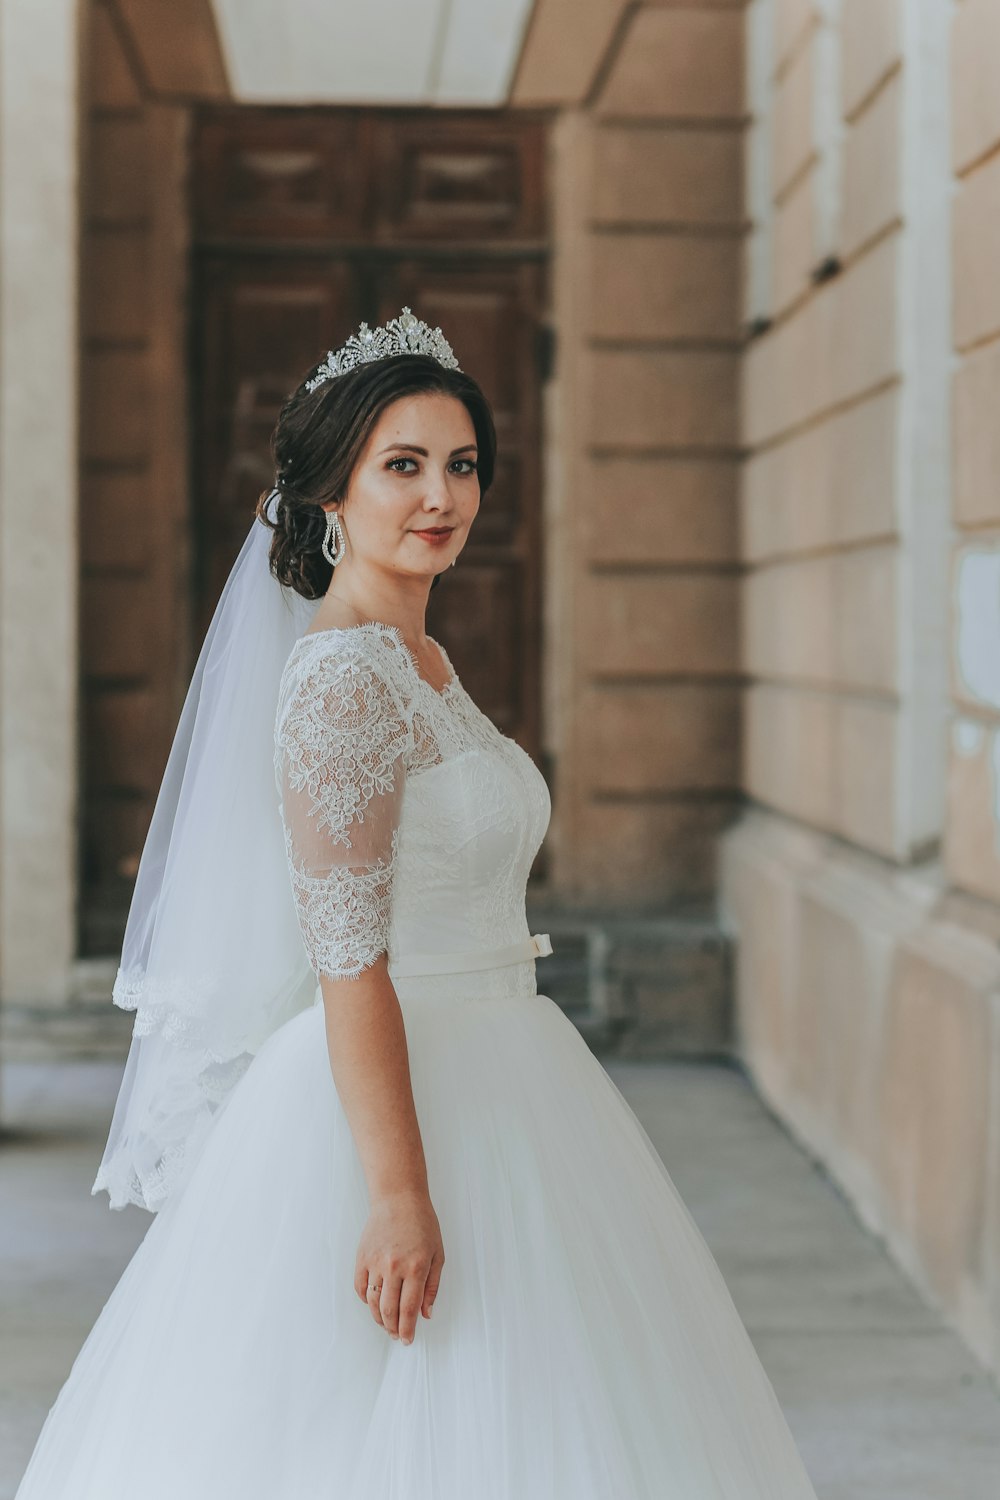 999+ Wedding Gown Pictures | Download Free Images on Unsplash